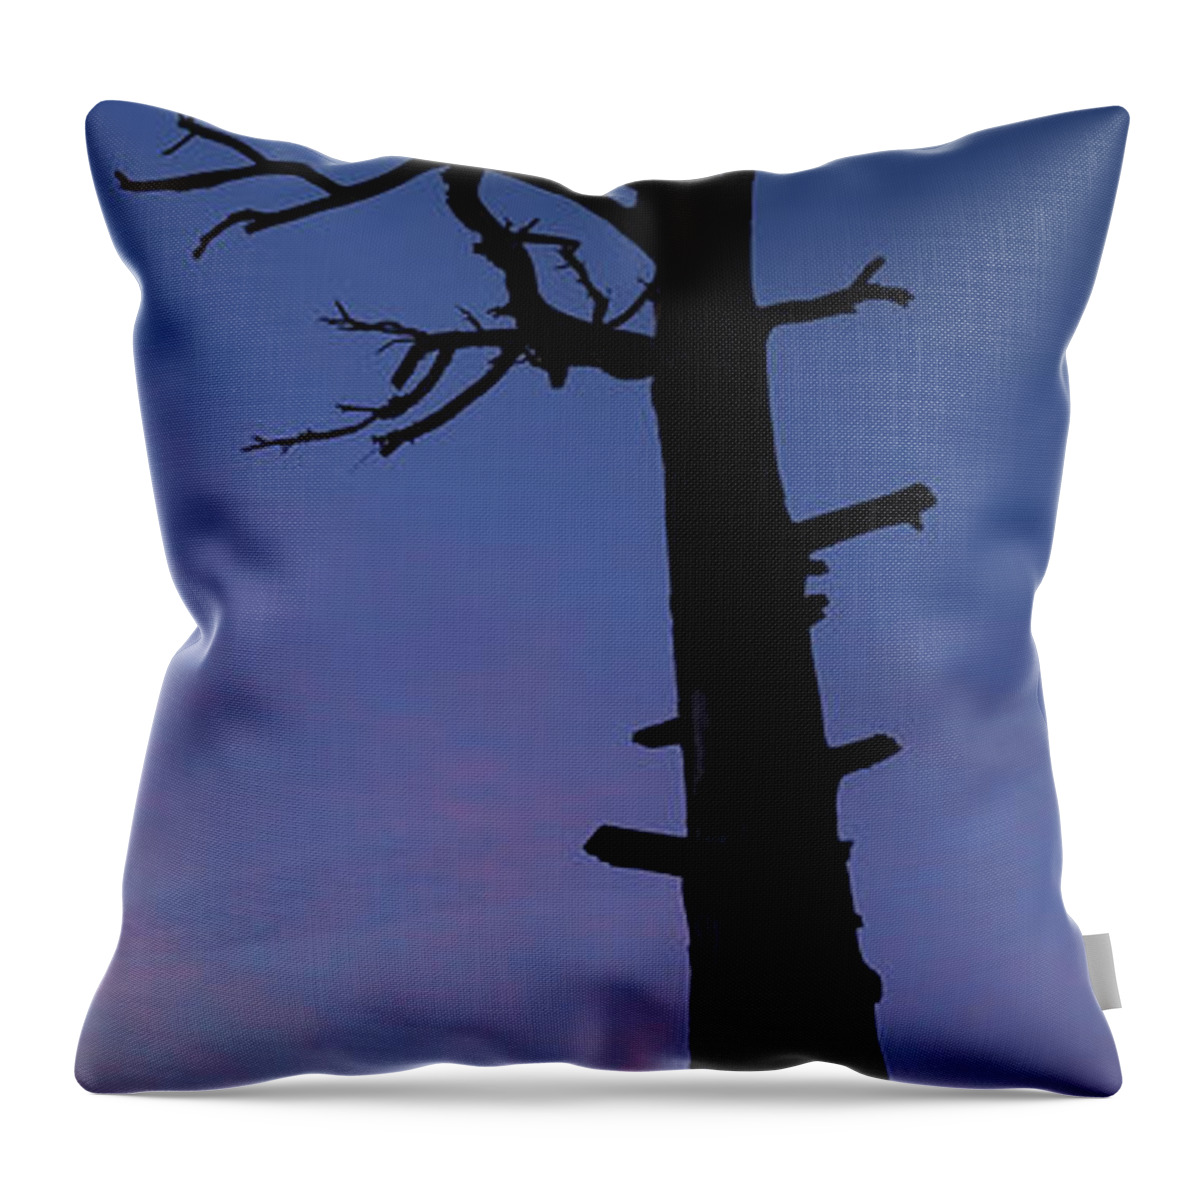 2018 Throw Pillow featuring the photograph Over The Top by Edgars Erglis